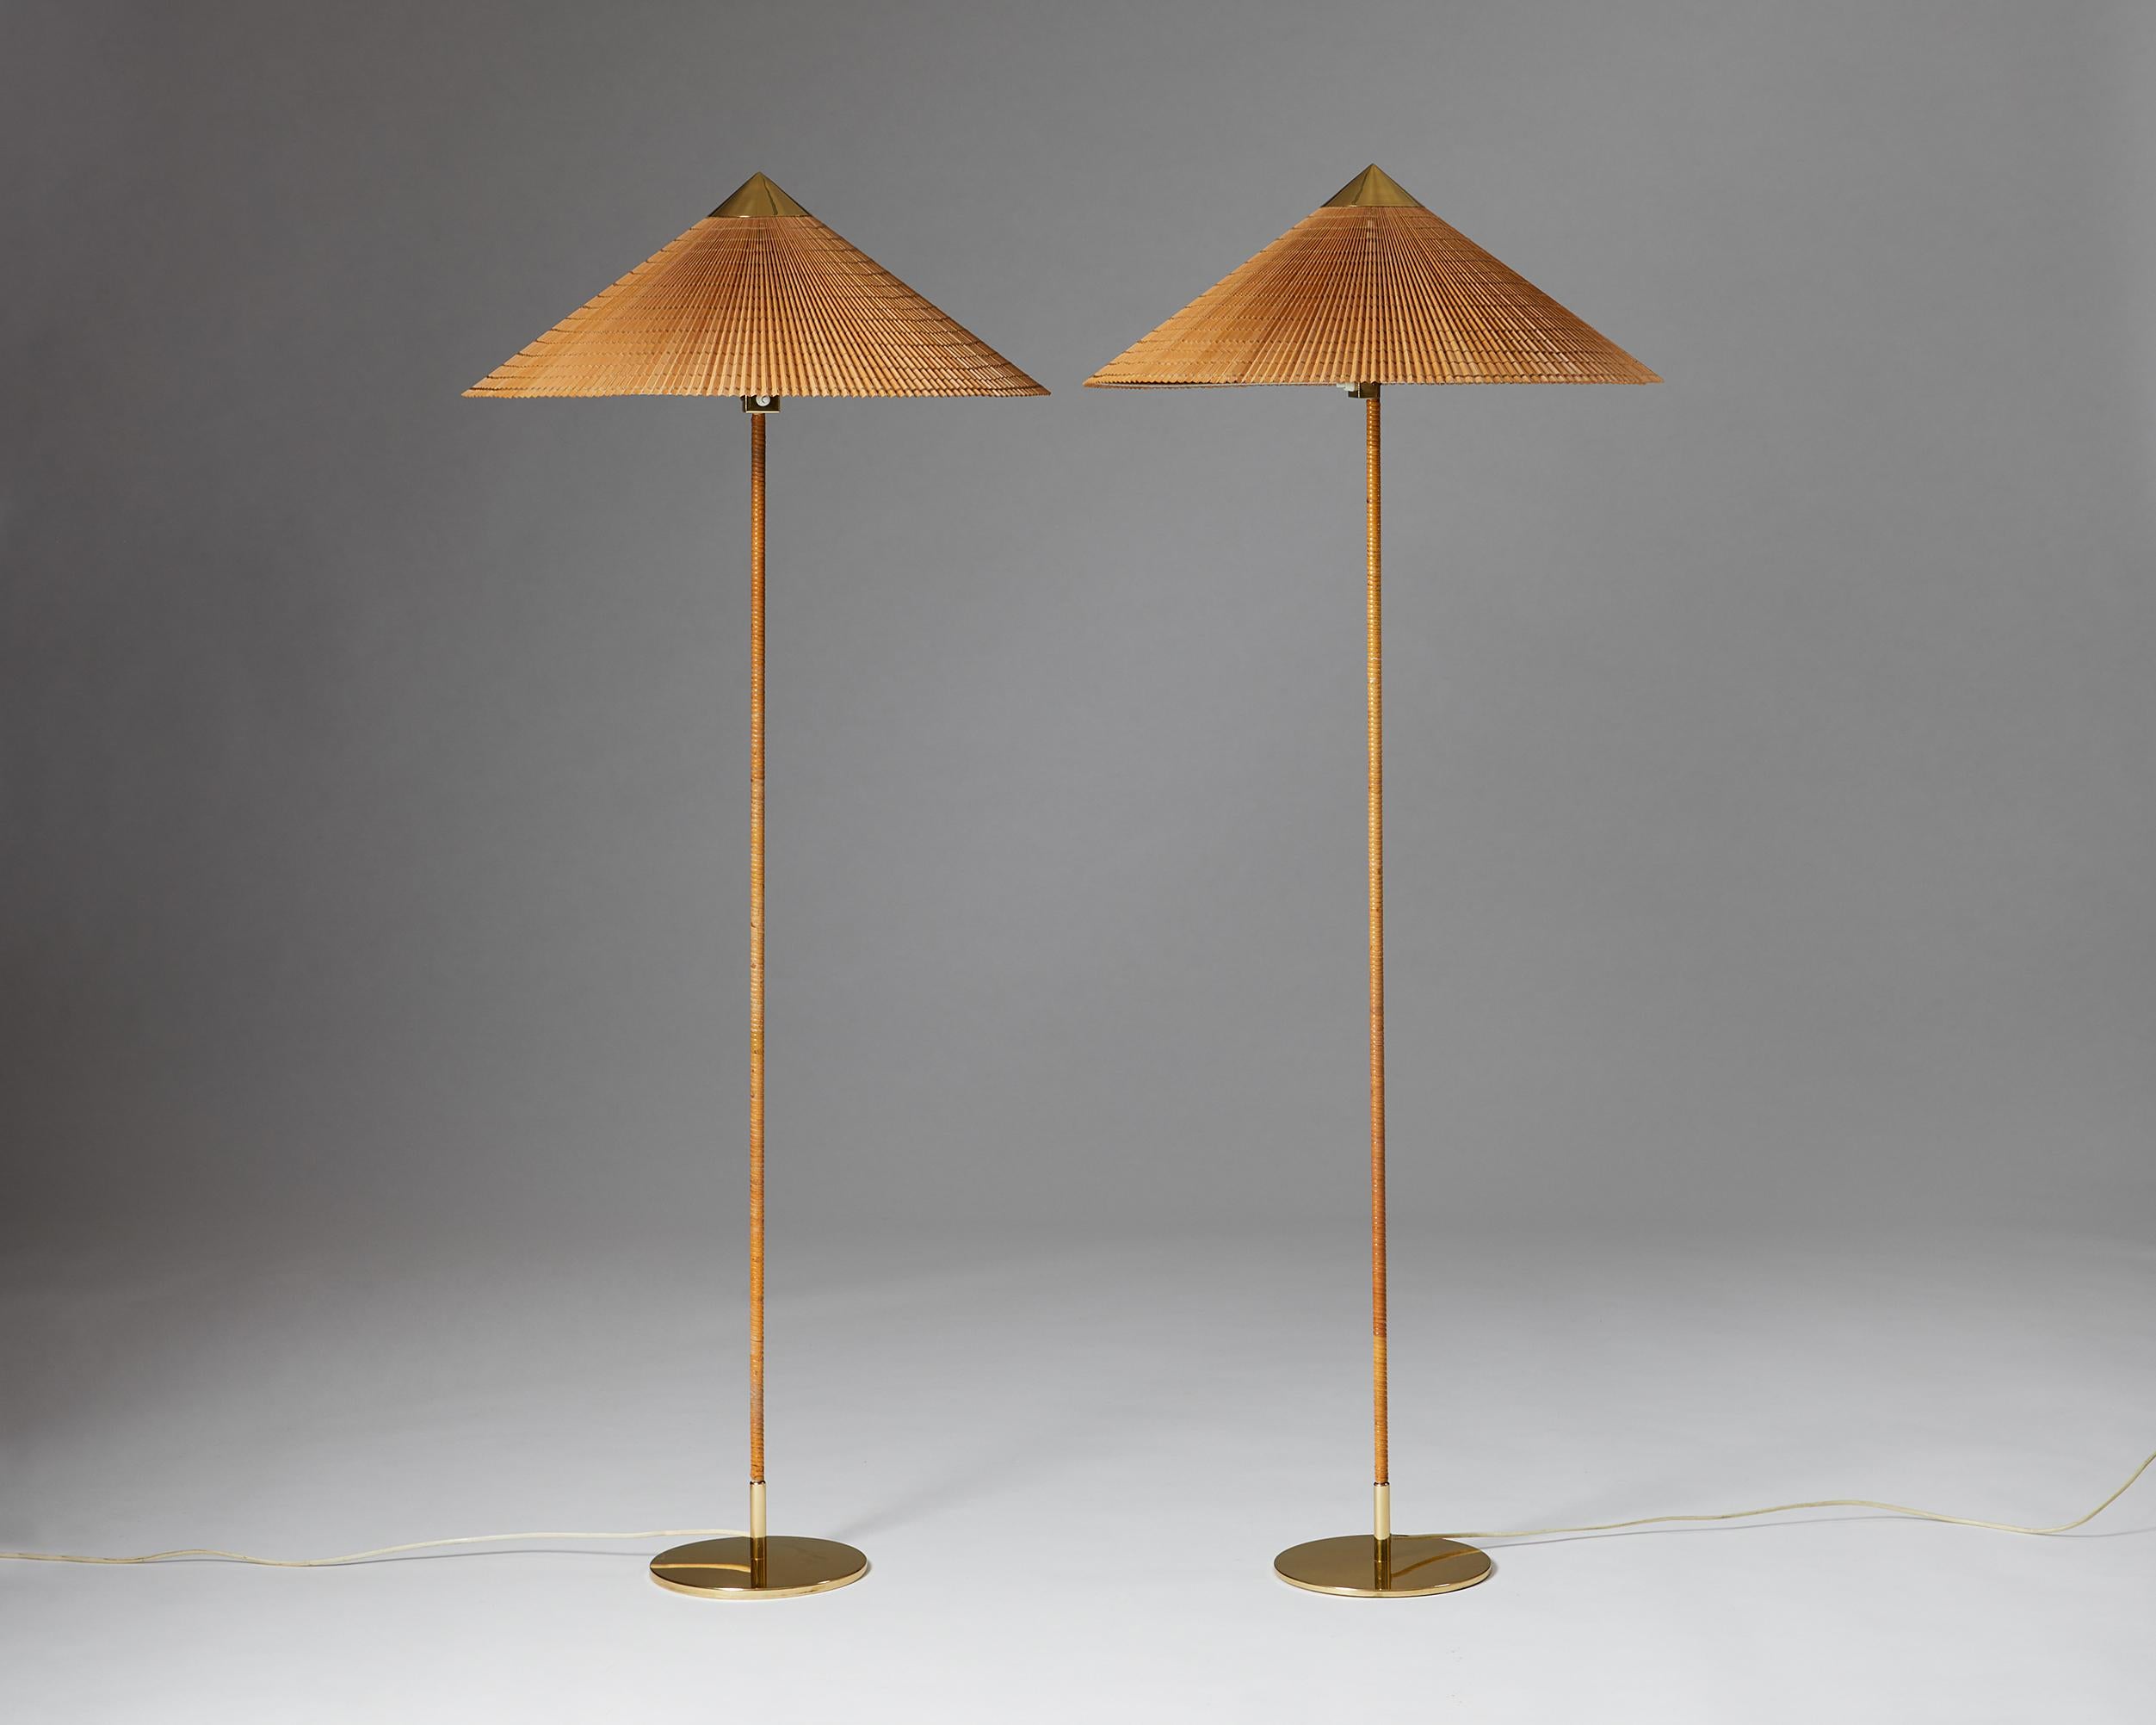 Brass and slatted wood shade.

Engraved “TAITO IDMAN” and “TAITO 9602”.

Measures: Height: 153 cm / 5’ 1/4’’
Diameter: 72 cm / 2’ 4 1/3’’.
 